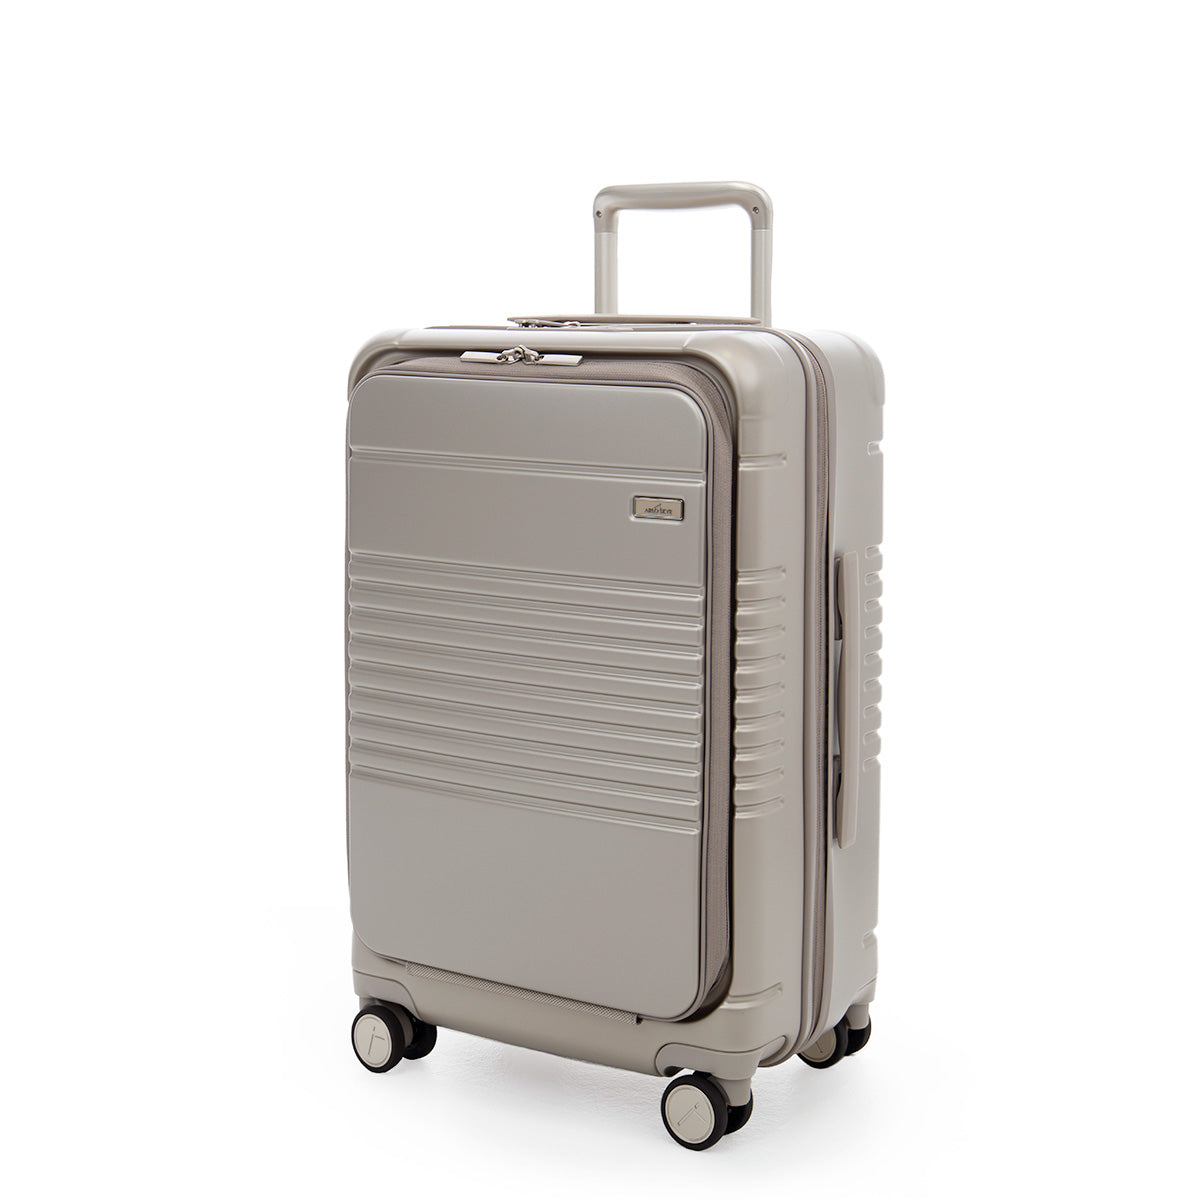 zipper carry-on max with front pocket in champagne color - side angle with pocket closed